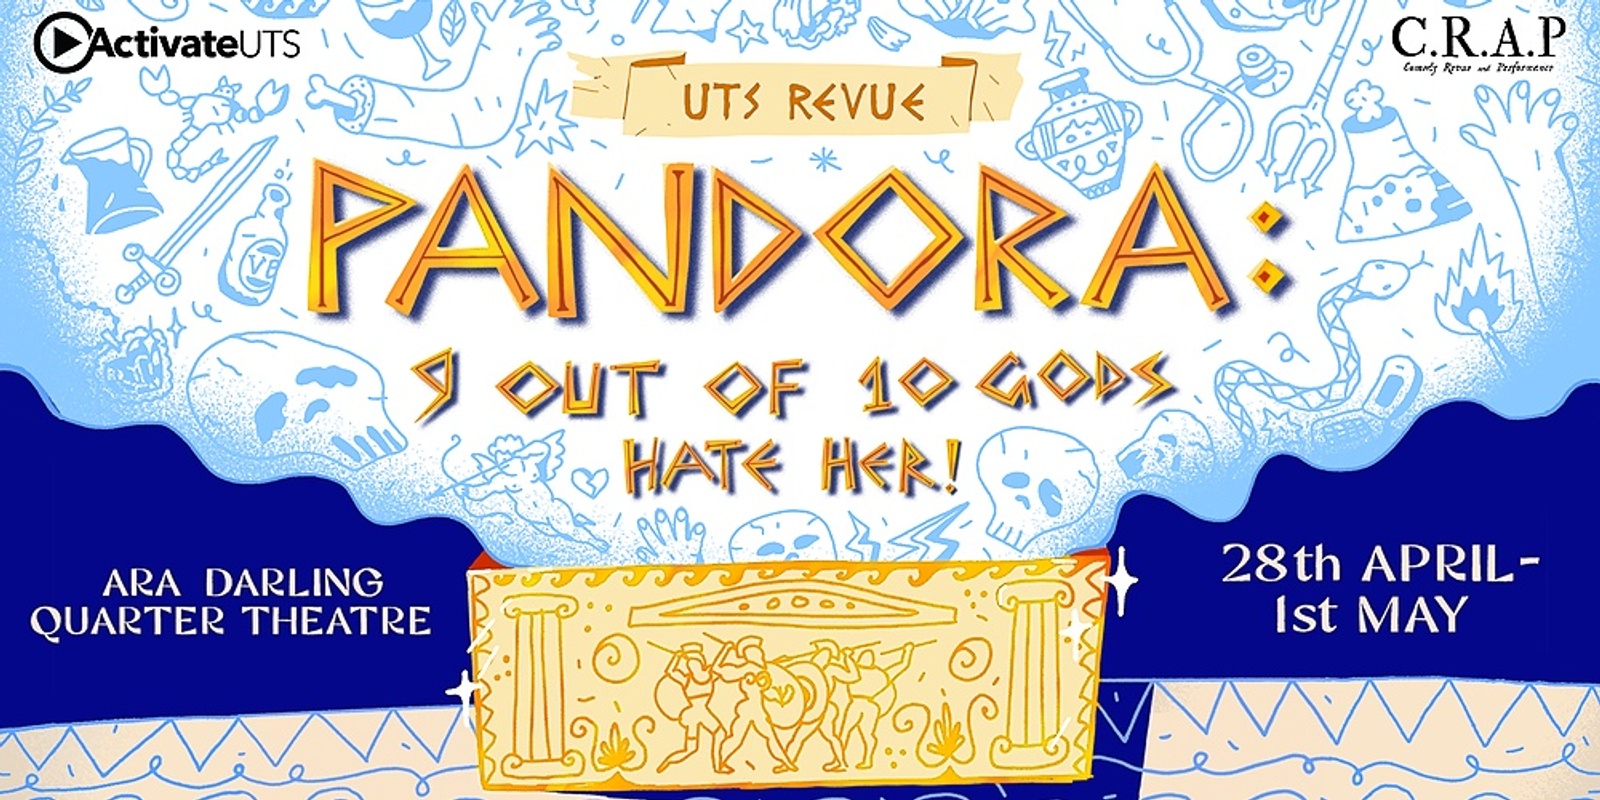 Banner image for UTS Revue - Pandora: 9 out of 10 Gods Hate Her!